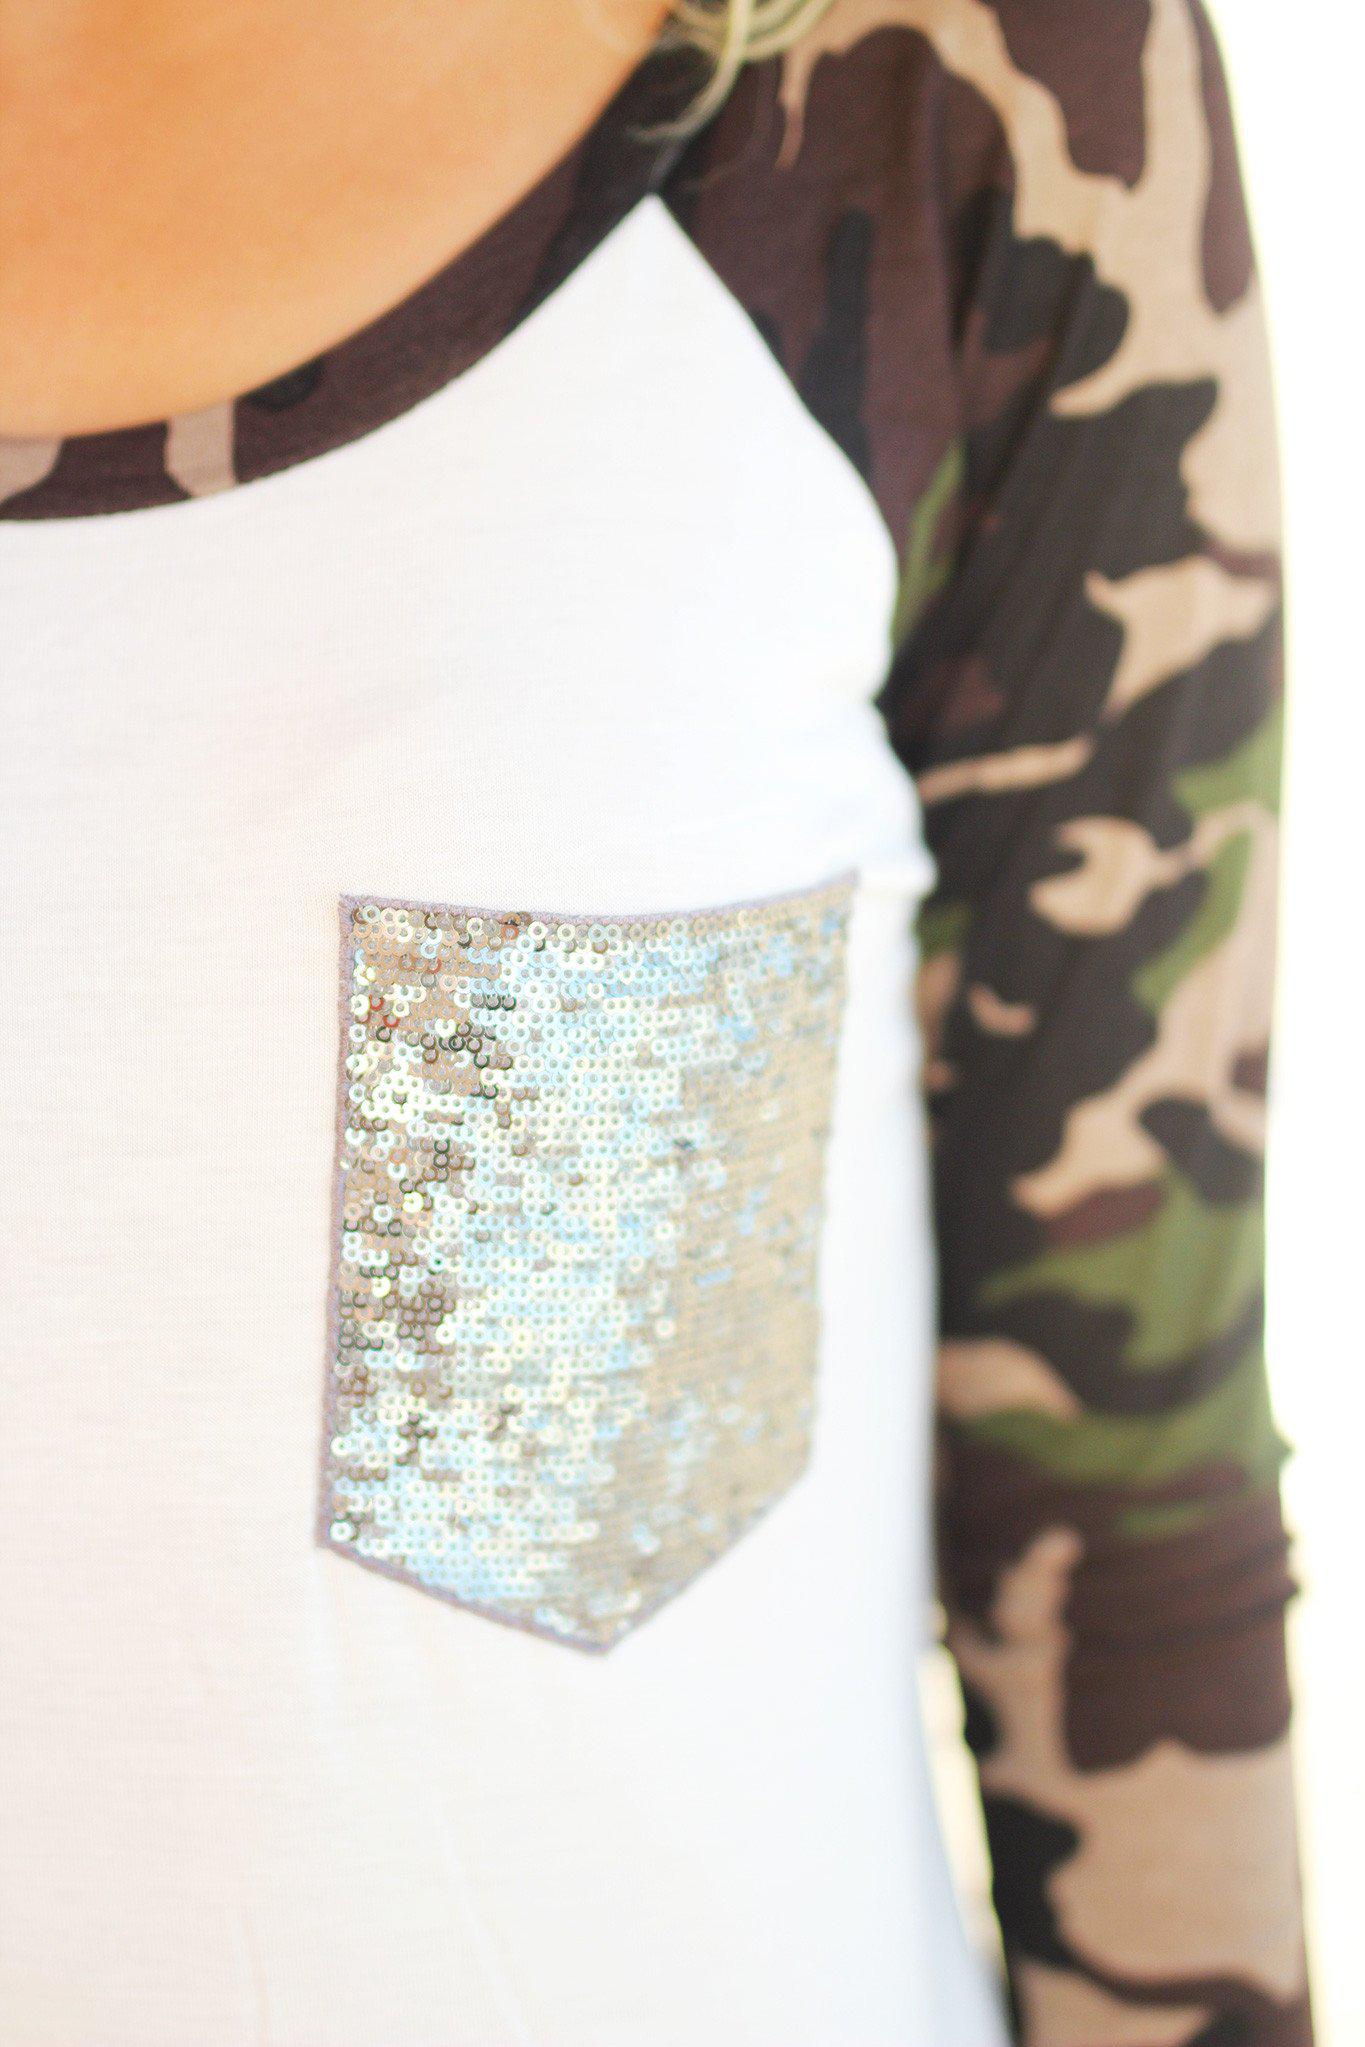 Ivory Camo Top with Sequined Pocket